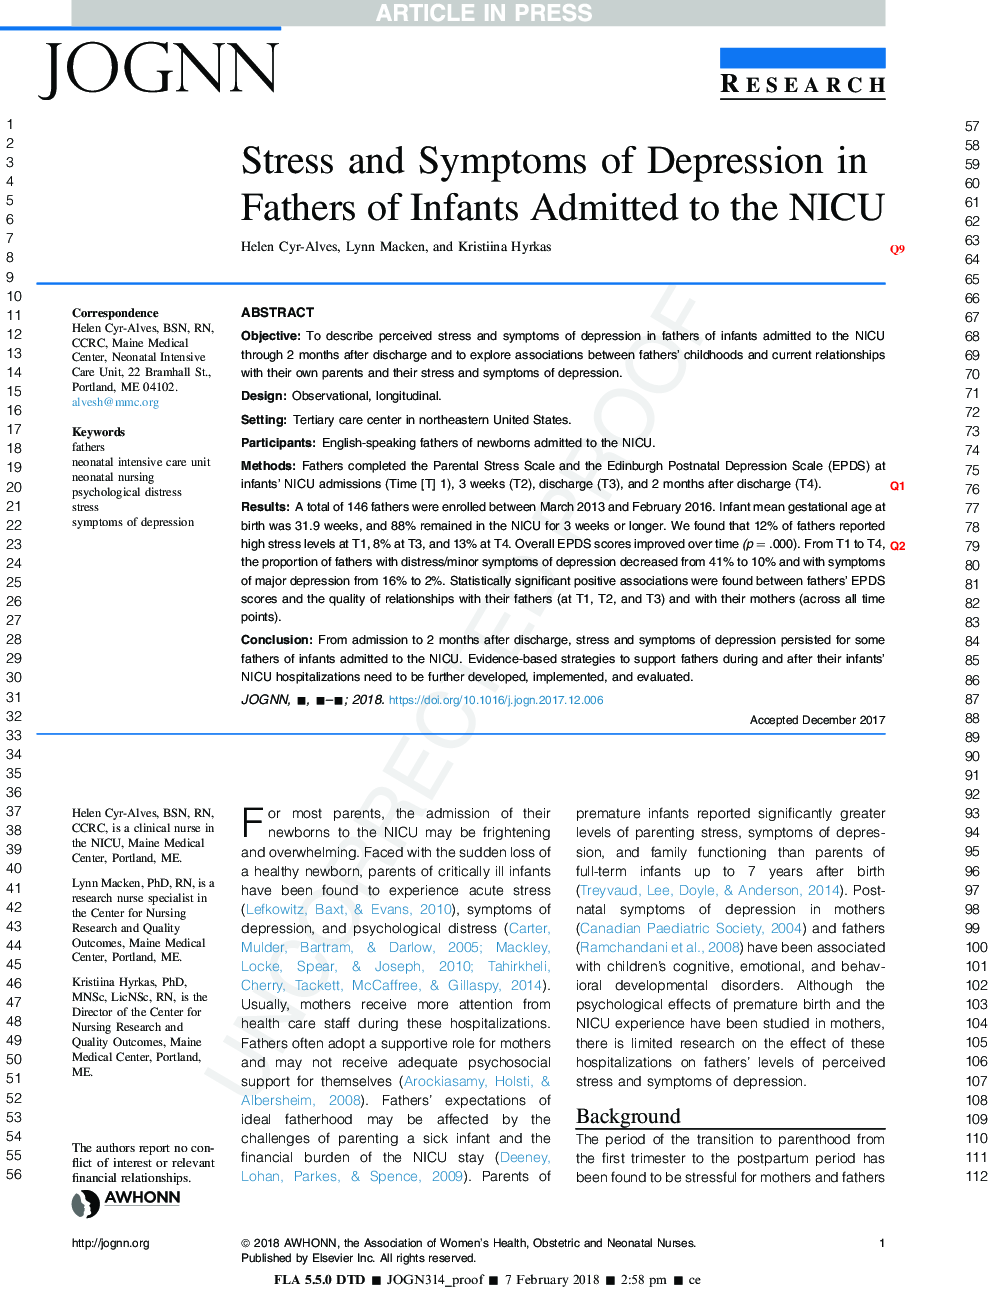 Stress and Symptoms of Depression in Fathers of Infants Admitted to the NICU